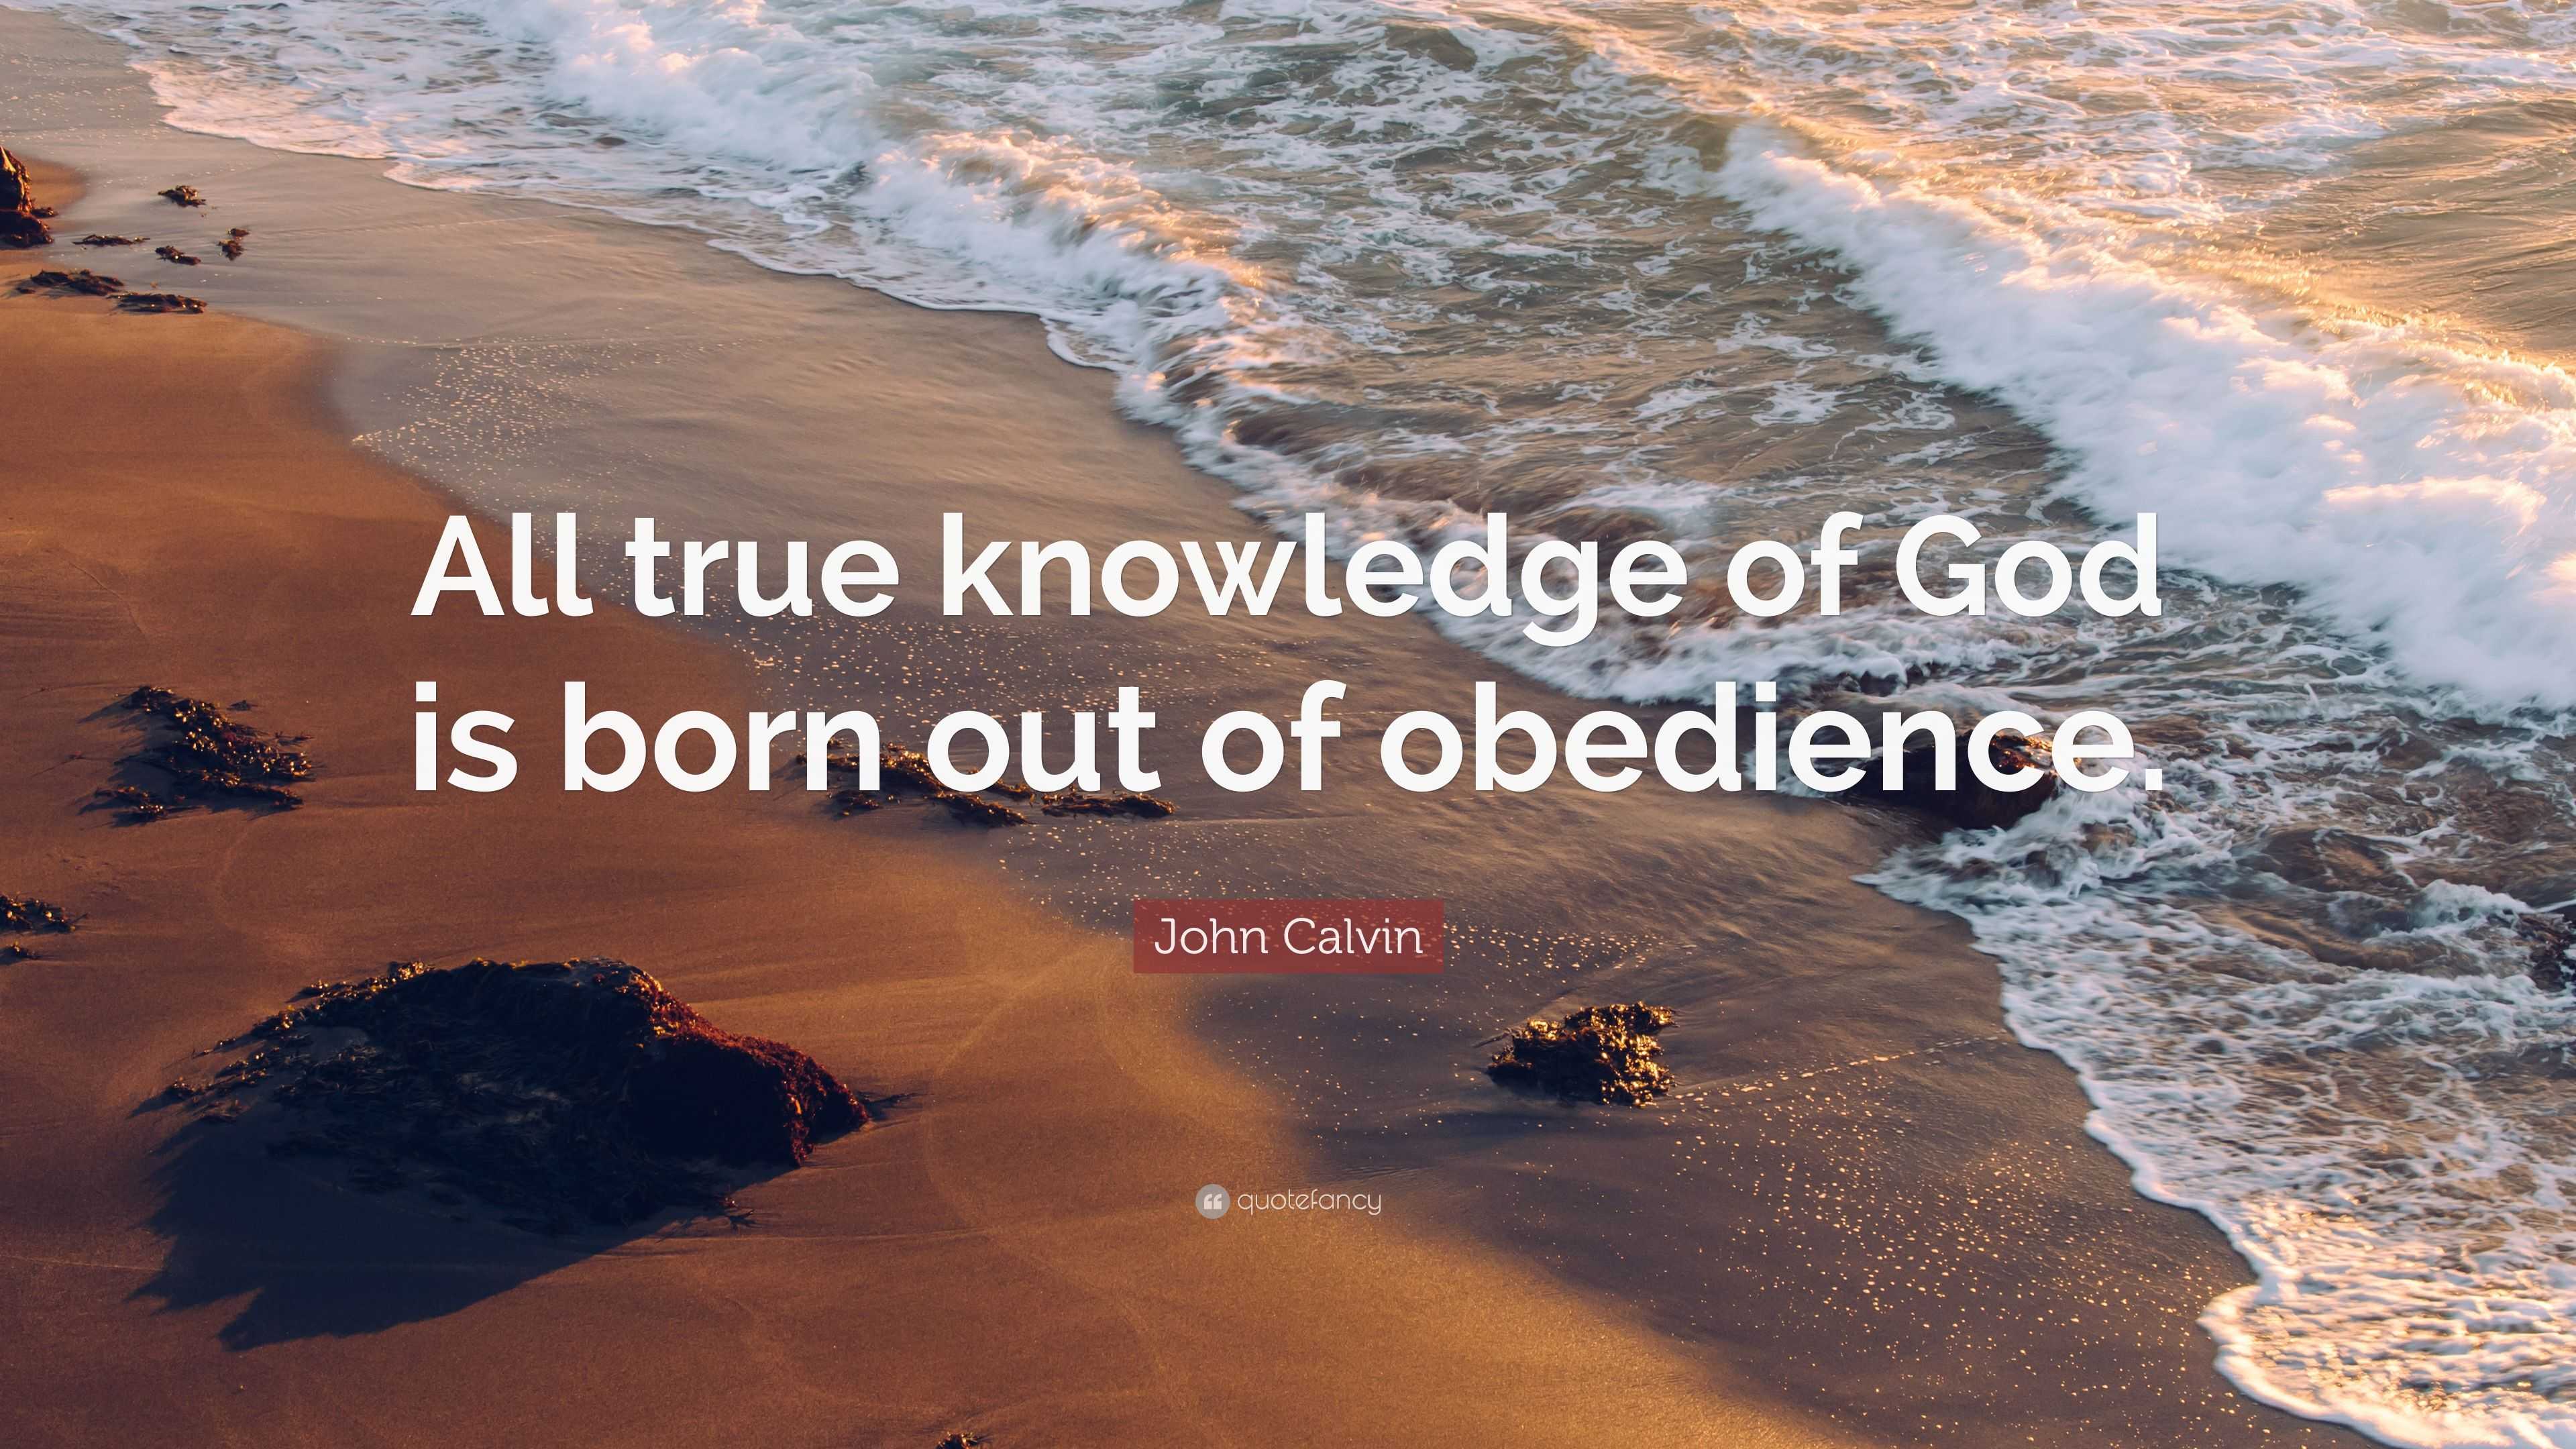 John Calvin Quote: “All true knowledge of God is born out of obedience.”